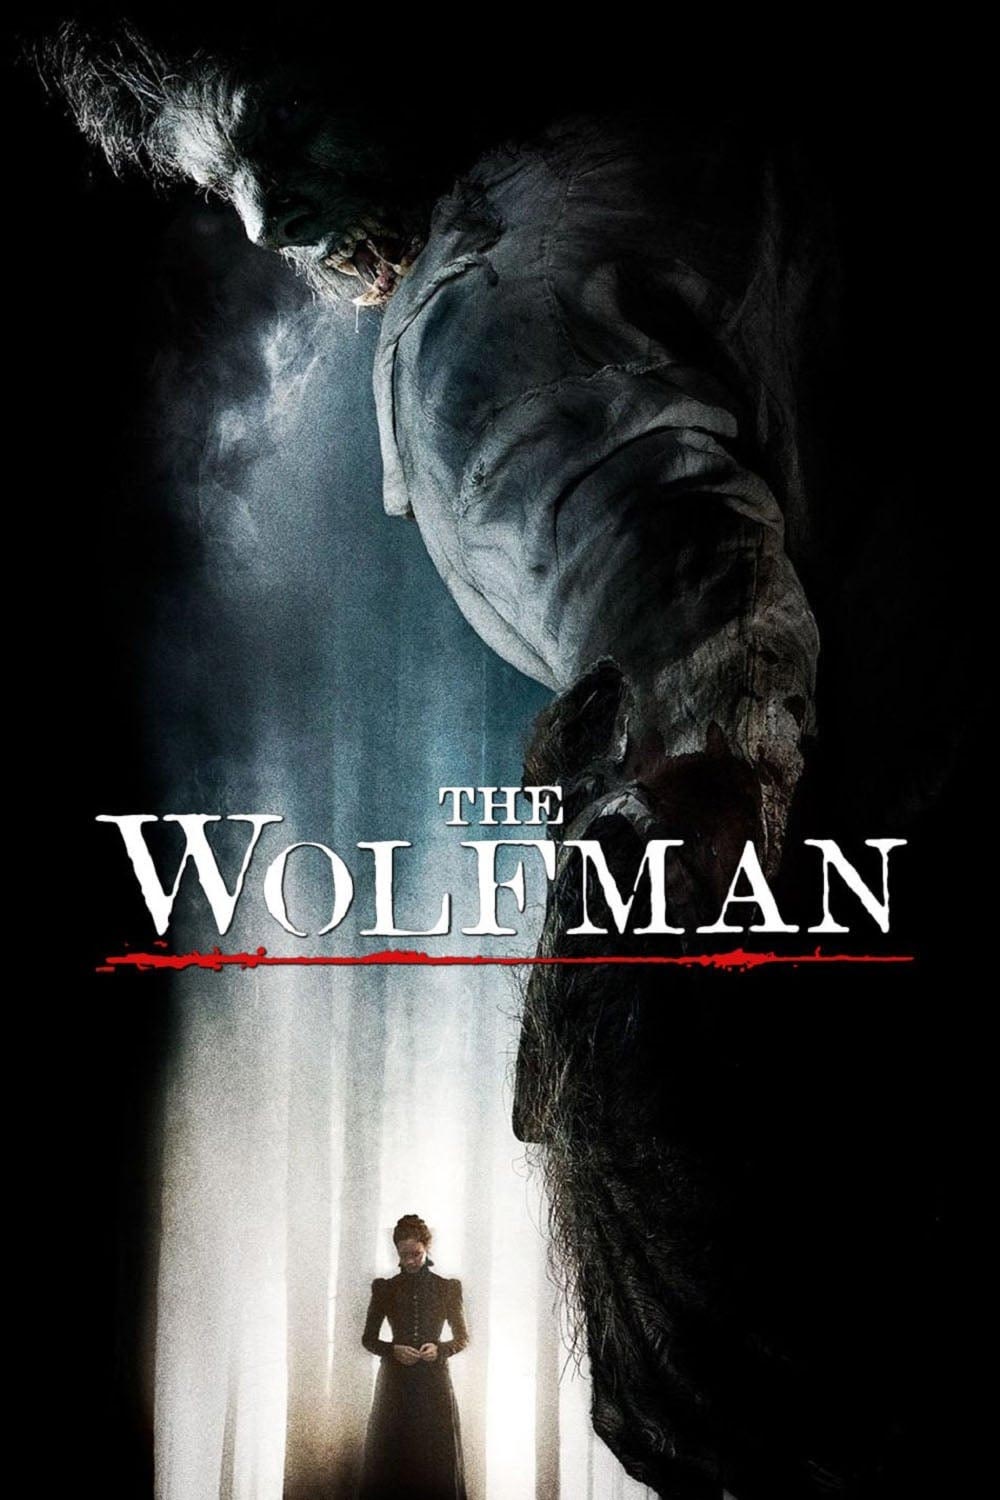 The Wolfman Poster